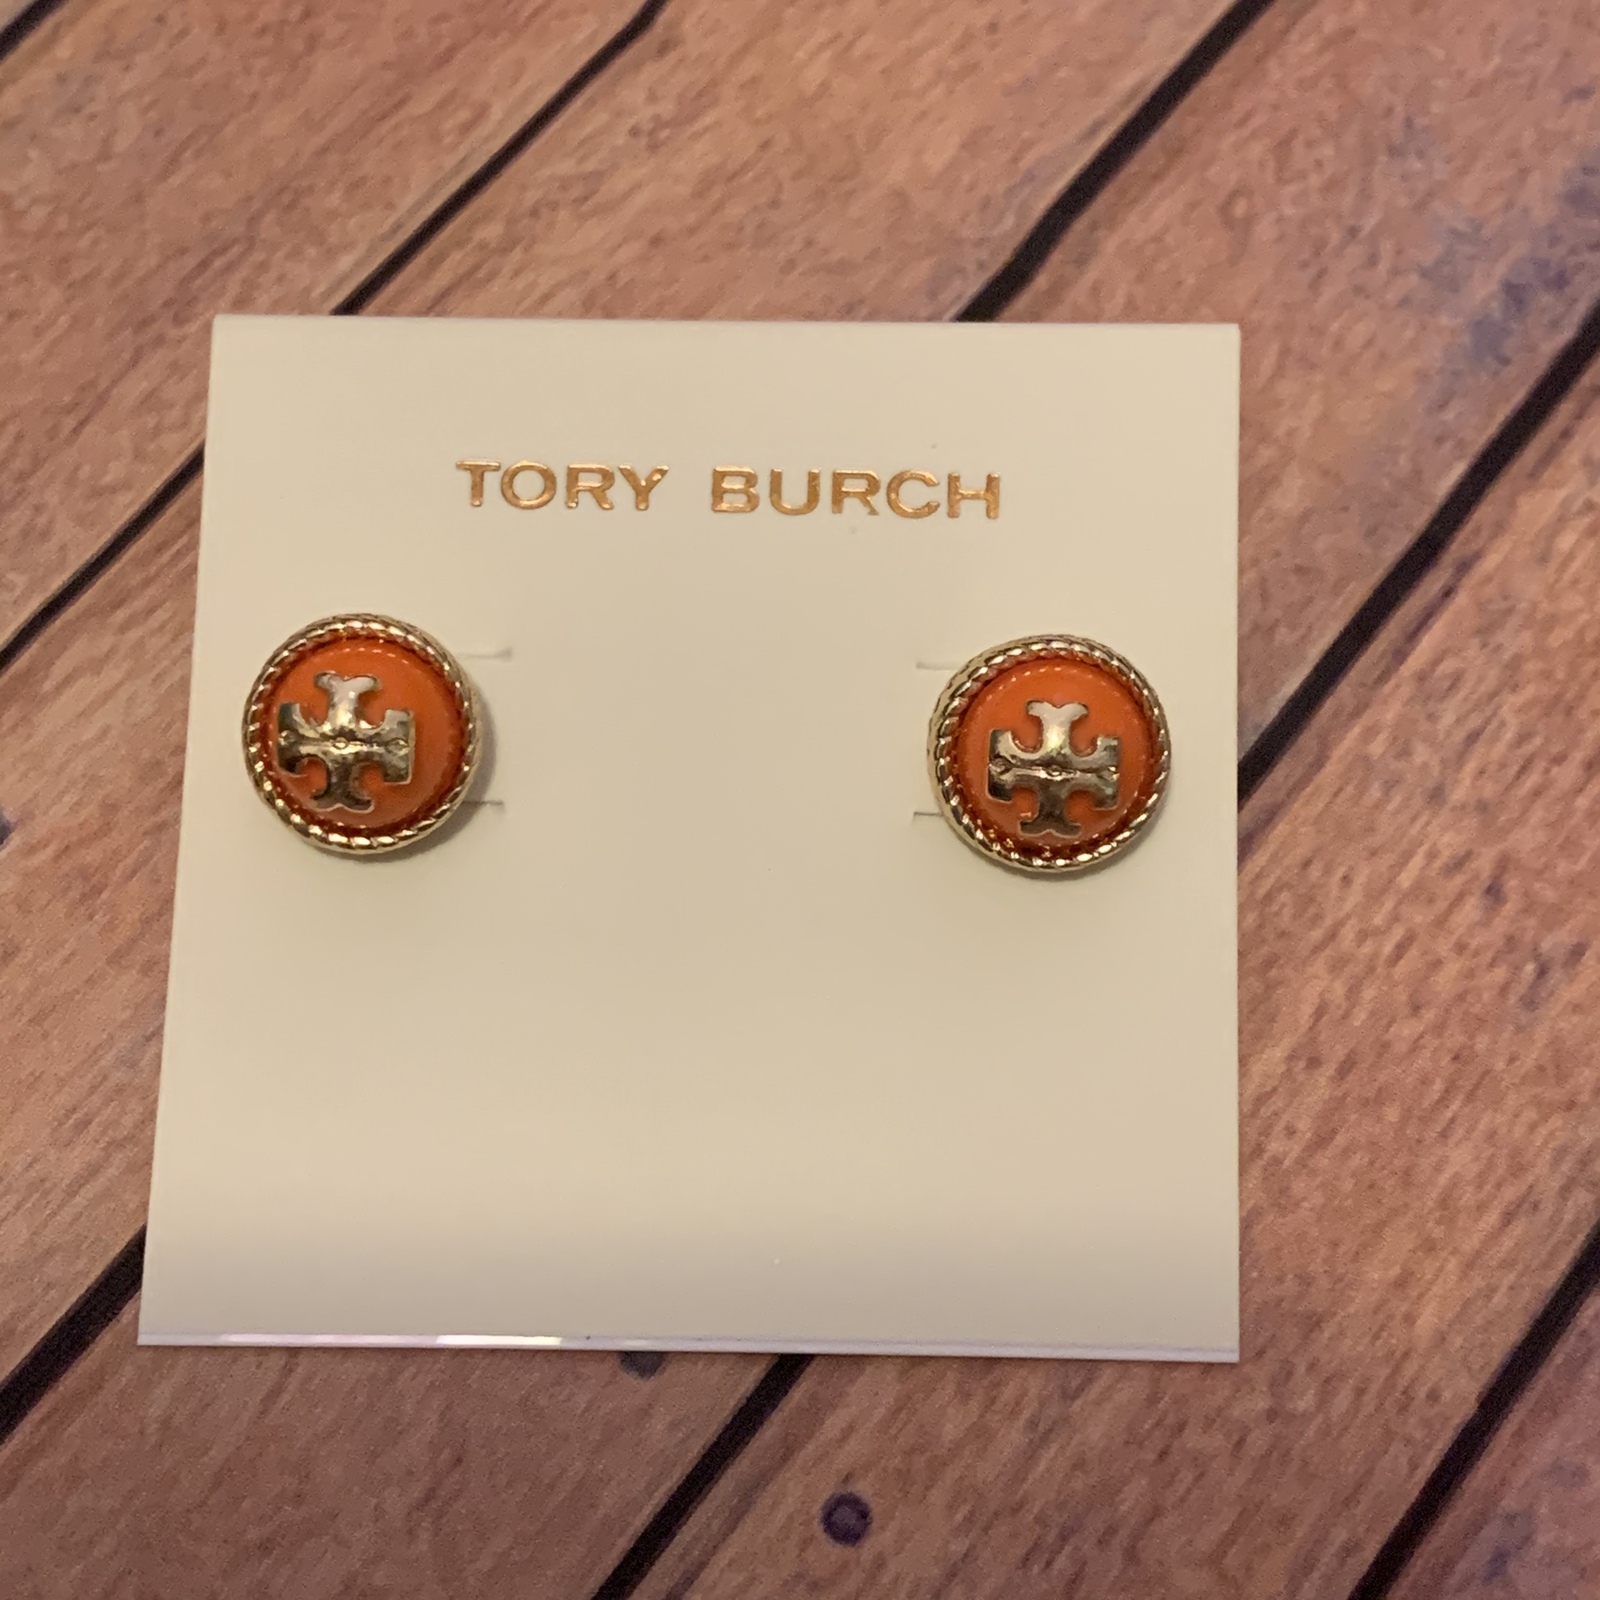 Primary image for Tory Burch Rope Style Enamel Stud Earrings